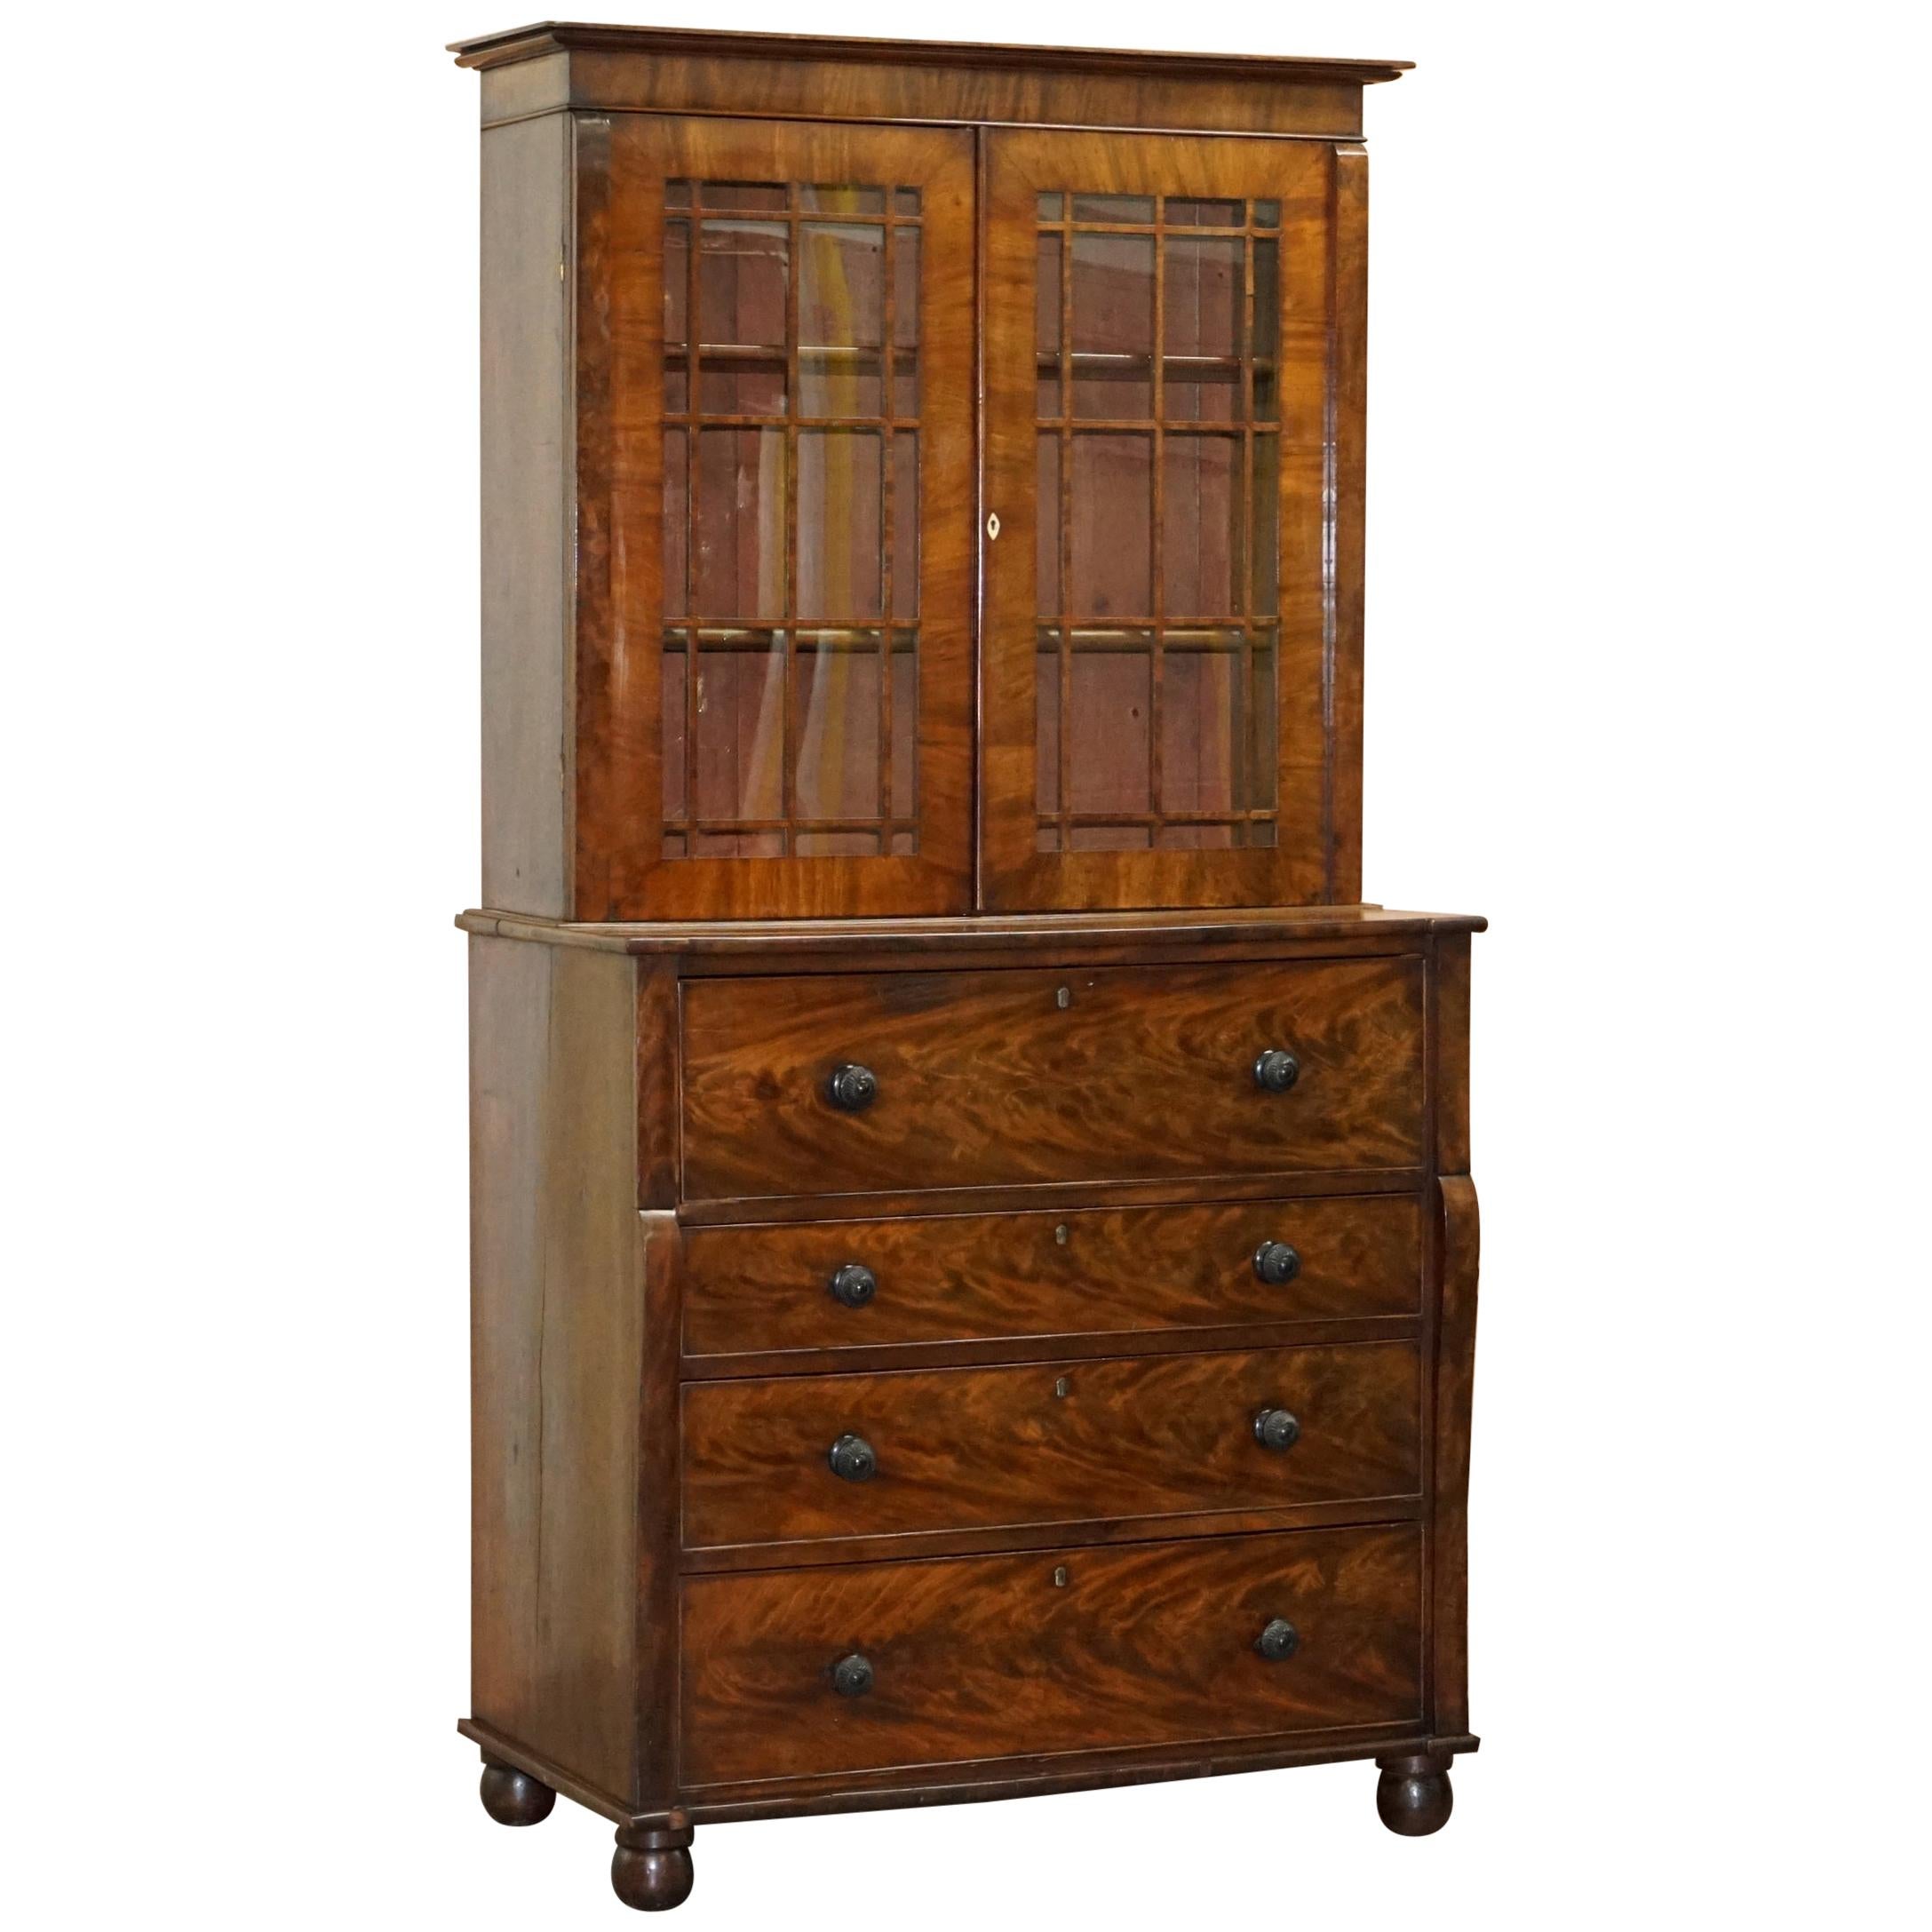 Rare Victorian Flamed Hardwood Library Bookcase Secretaire Desk Chest of Drawers For Sale